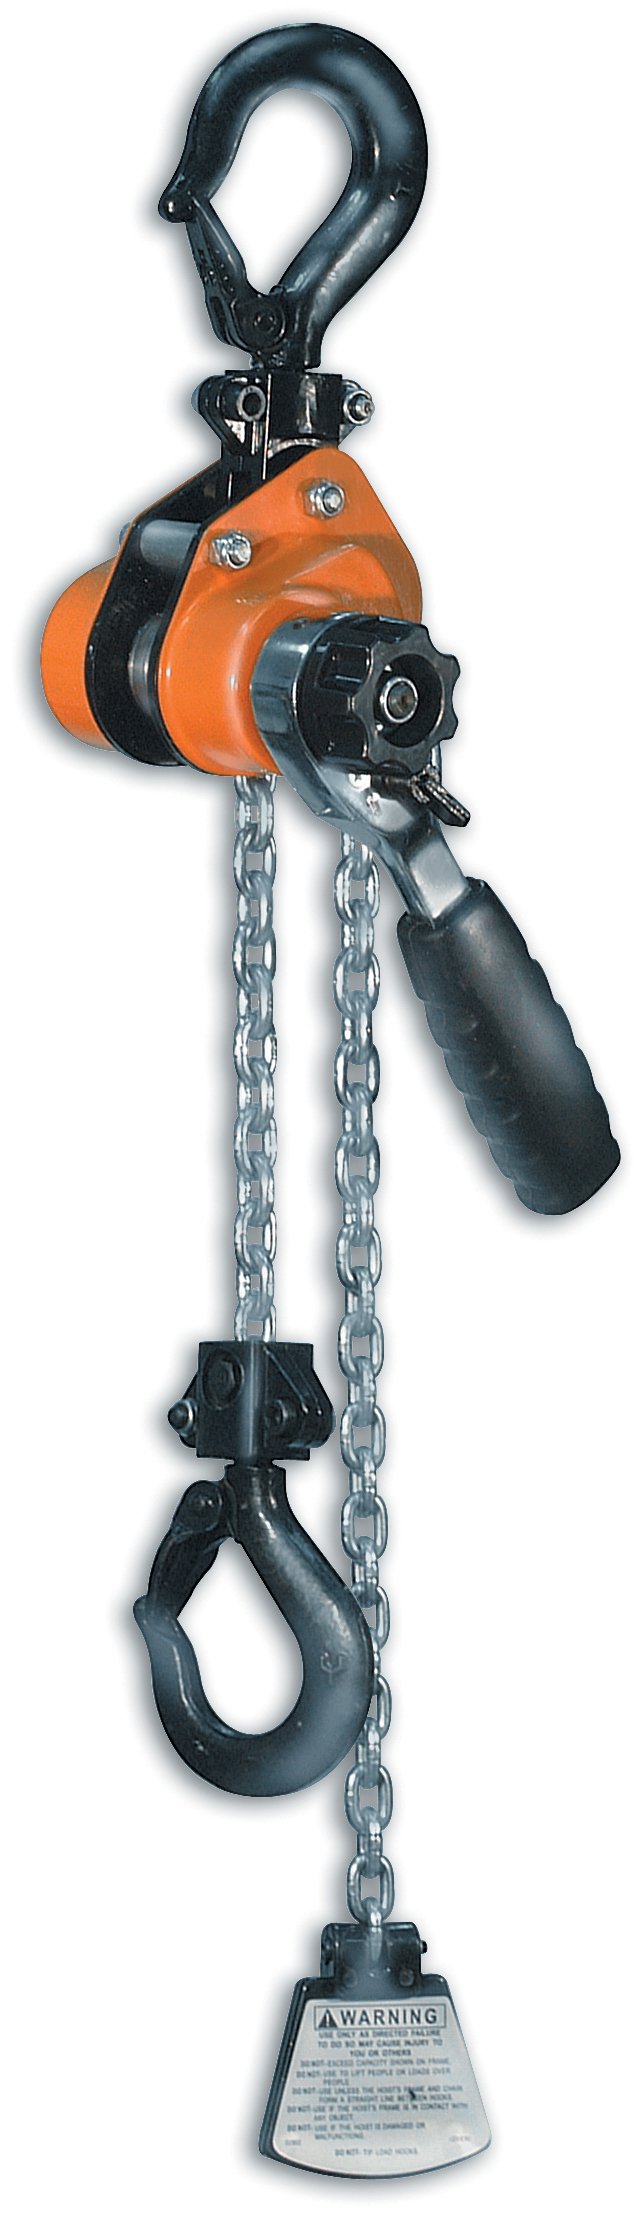 CM 603 Series Mini Ratchet Lever Chain Hoist, 6-3/8" Lever, 1100 lbs Capacity, 10' Lift Height, 1" Opening